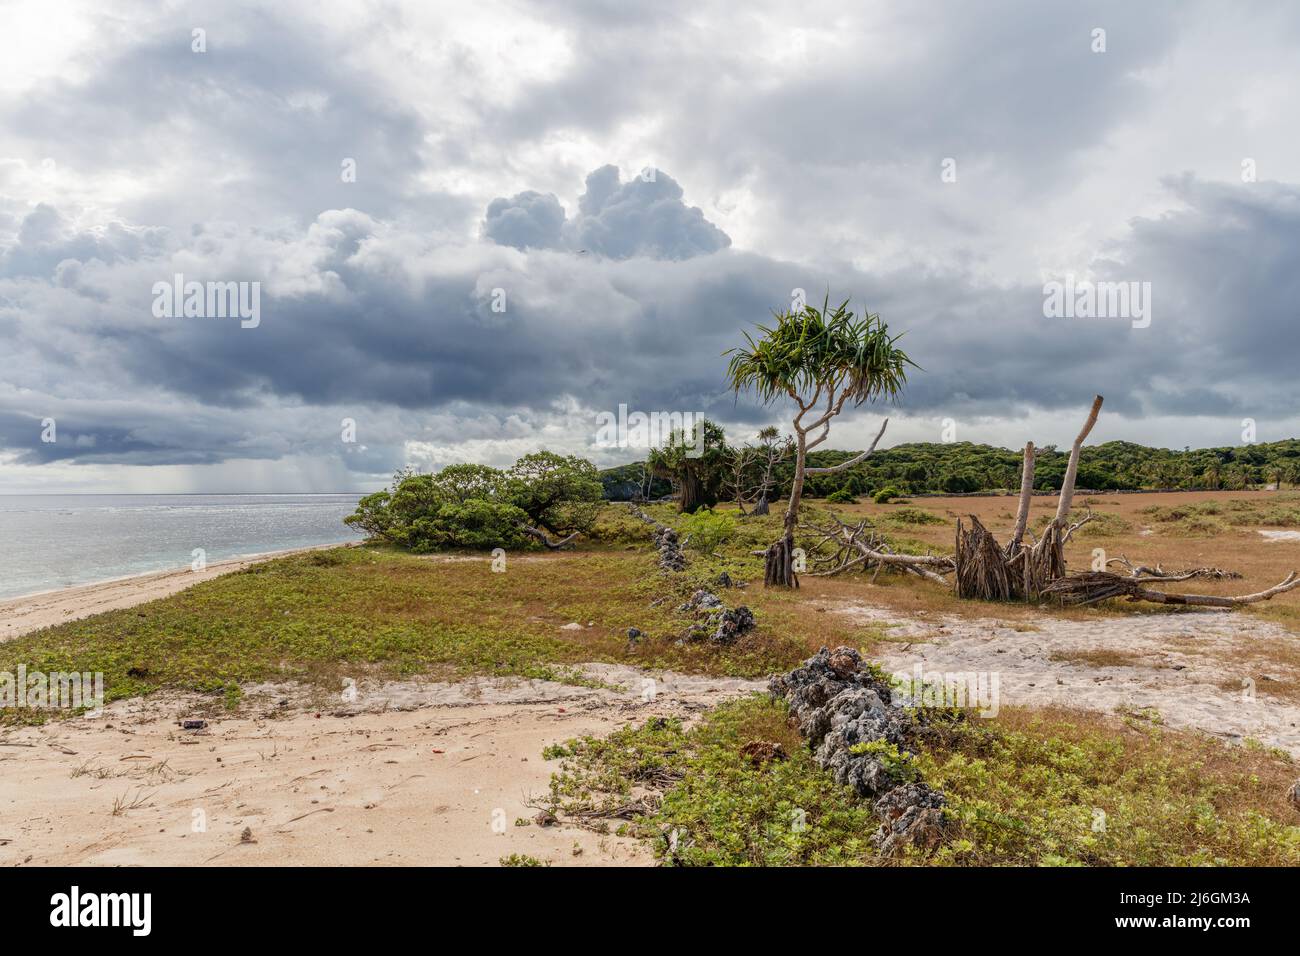 Savanna landscape with stormy clouds of Boa Beach at Rote Island, East Nusa Tenggara province, Indonesia. Stock Photo